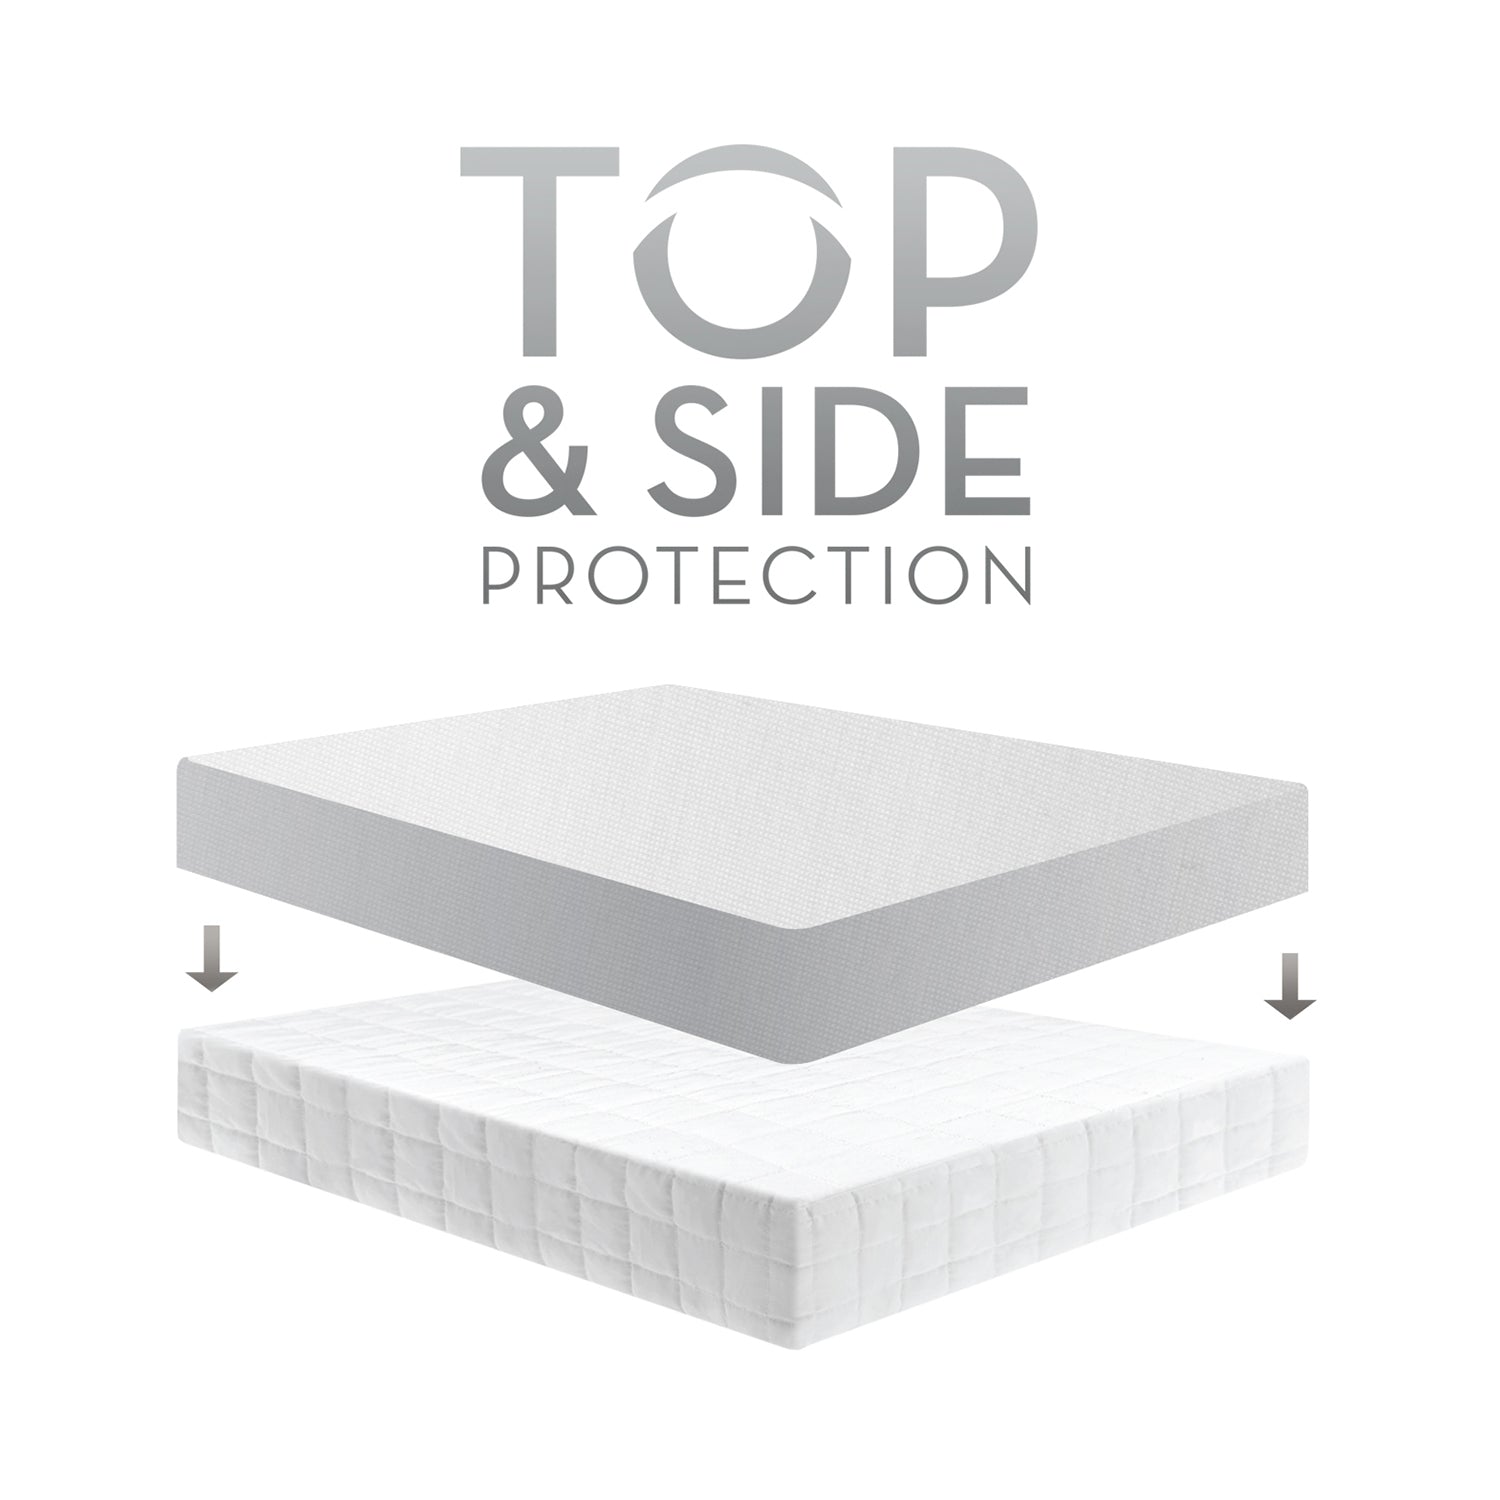 Five 5ided® Mattress Protector with Tencel® + Omniphase® top & side protection 